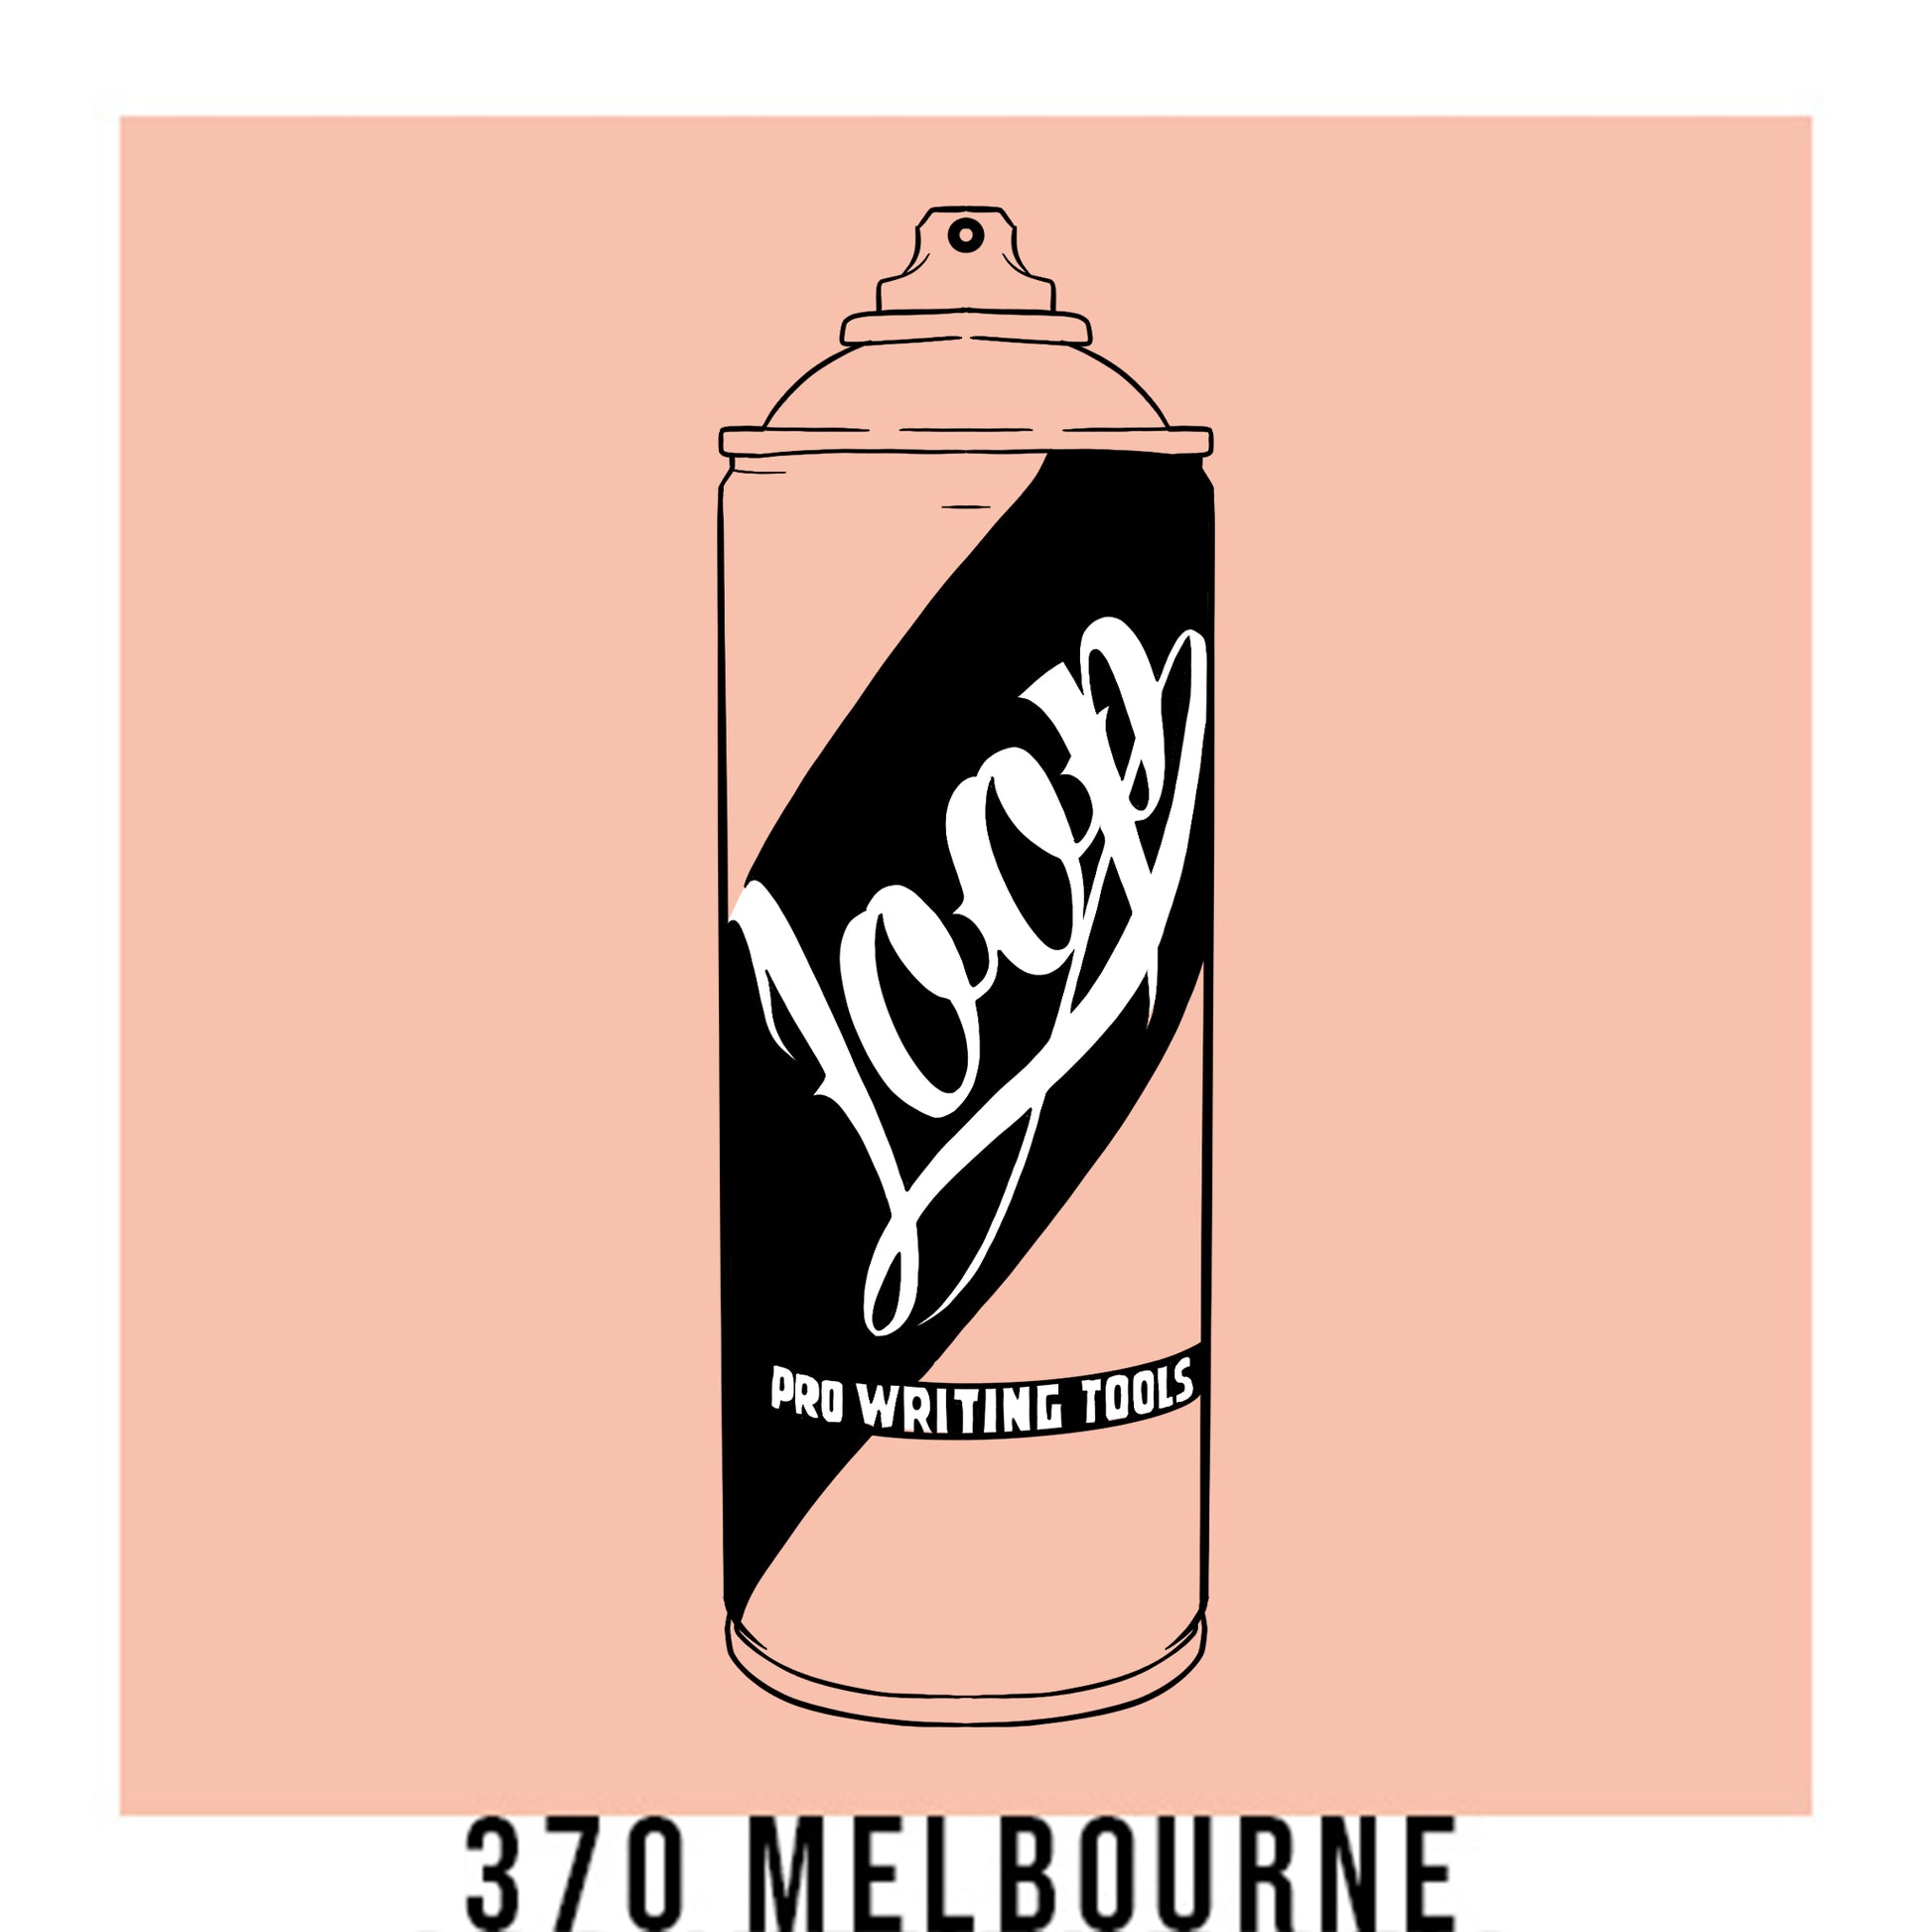 A black outline drawing of a light peach spray paint can with the word "Loop" written on the face in script. The background is a color swatch of the same light peach with a white border with the words "370 Melbourne" at the bottom.